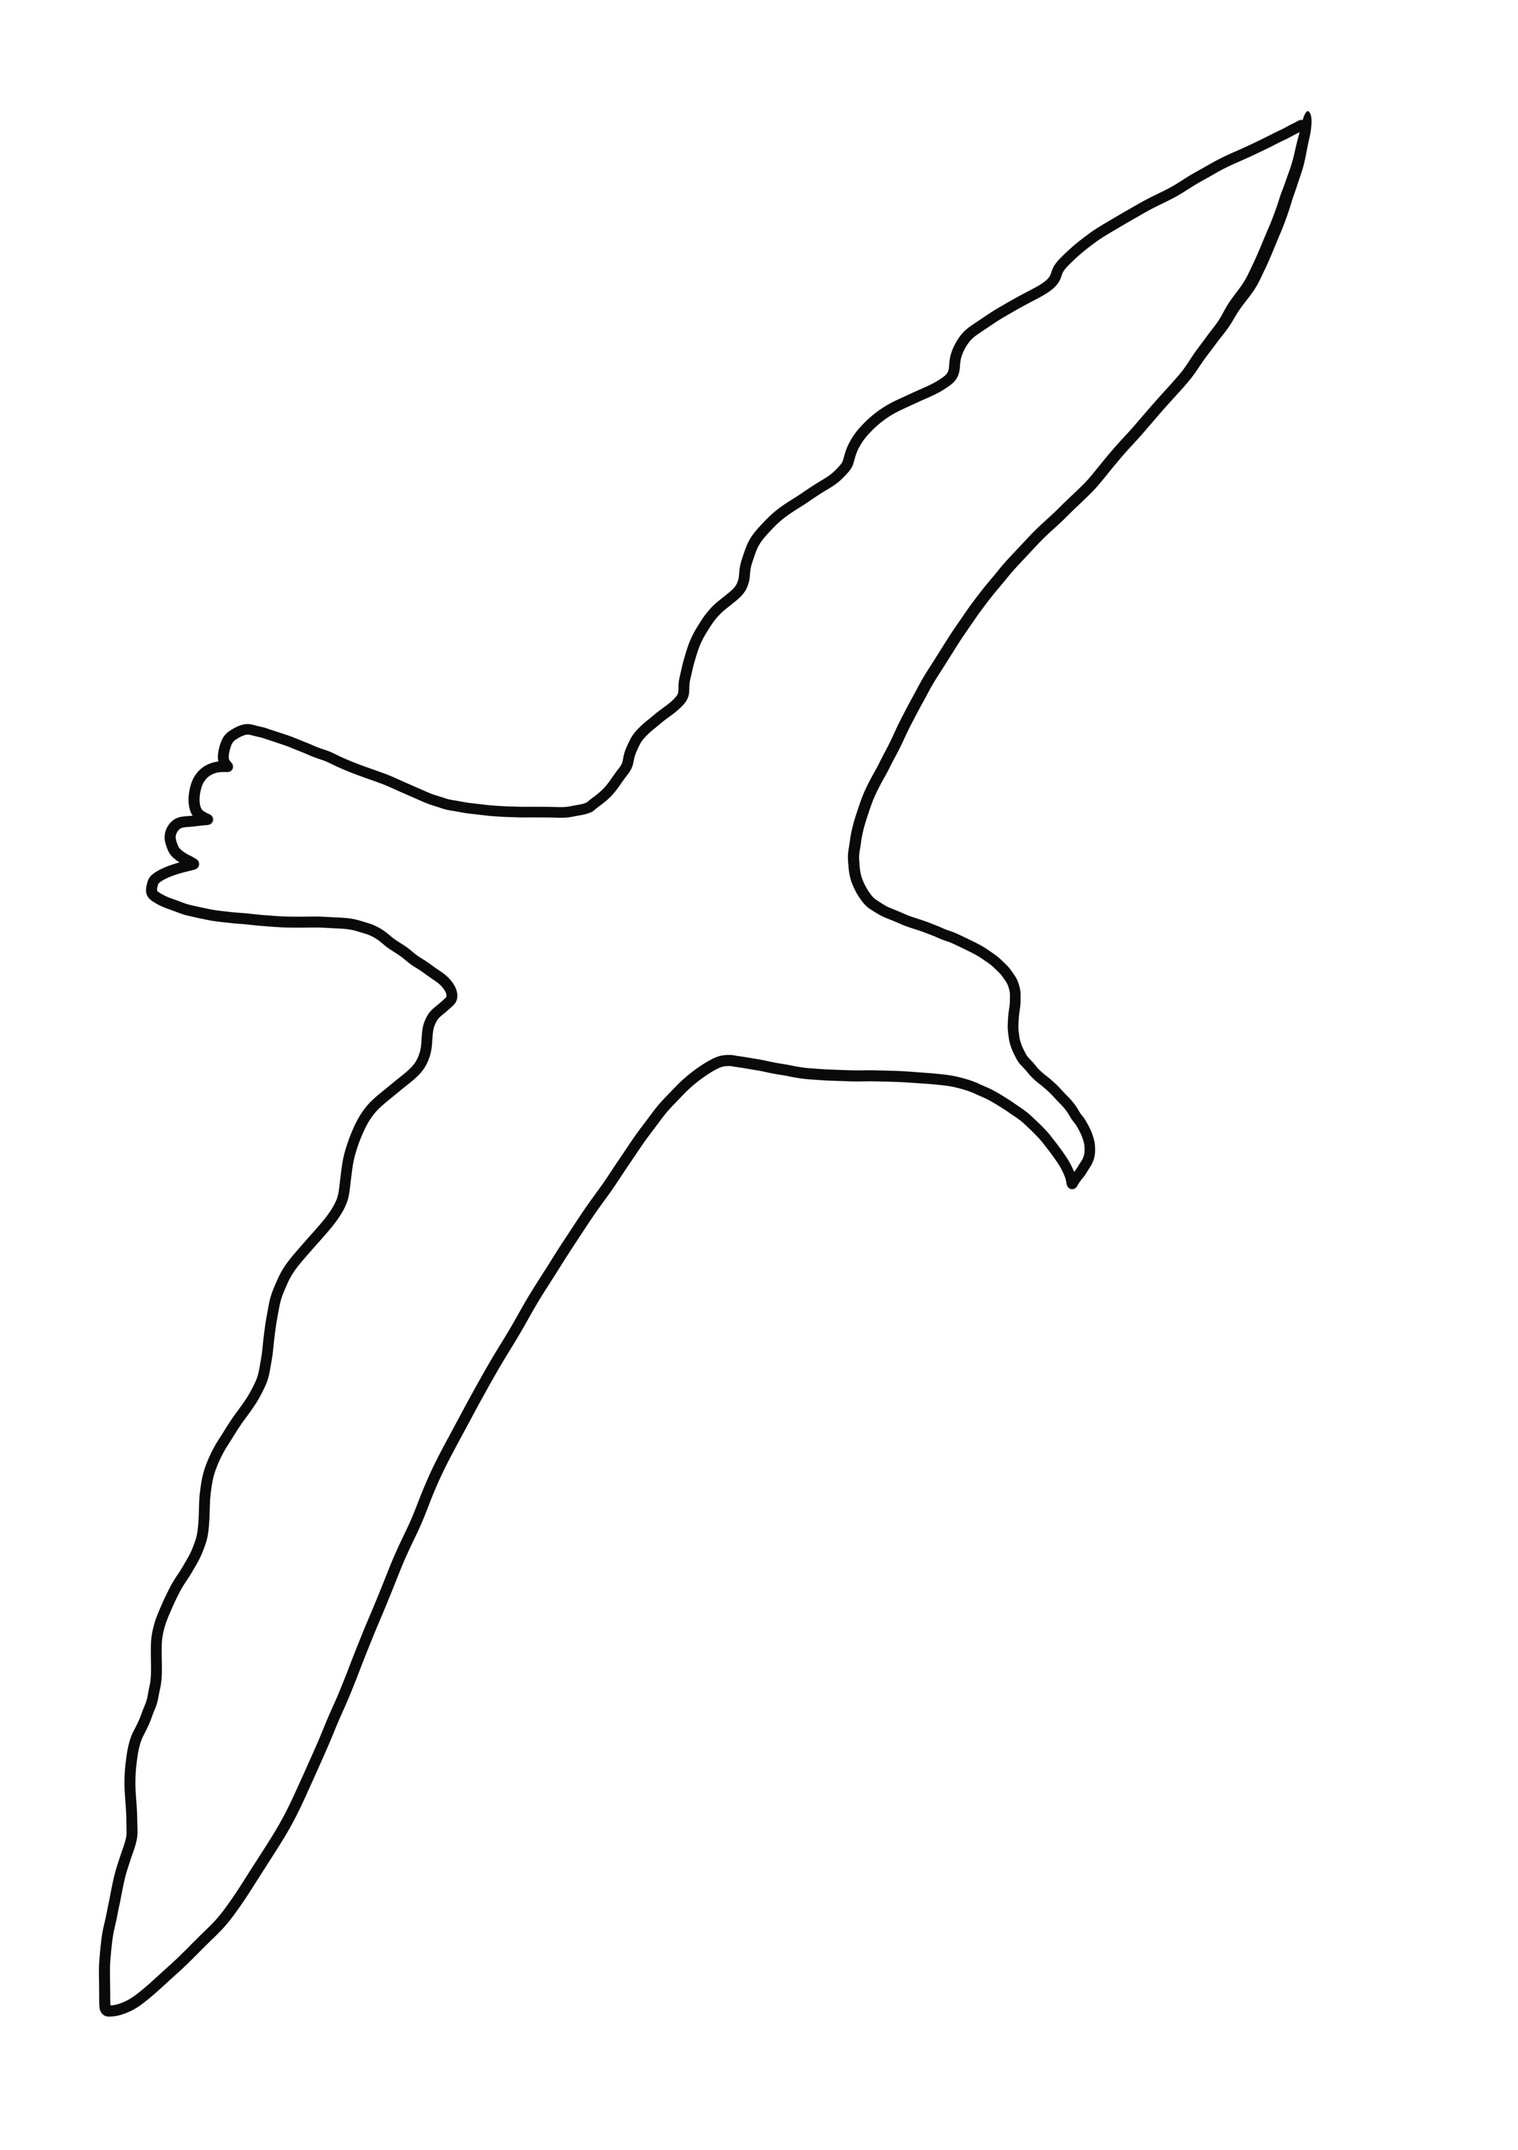 Albatross silhouette coloring page to print and coloring